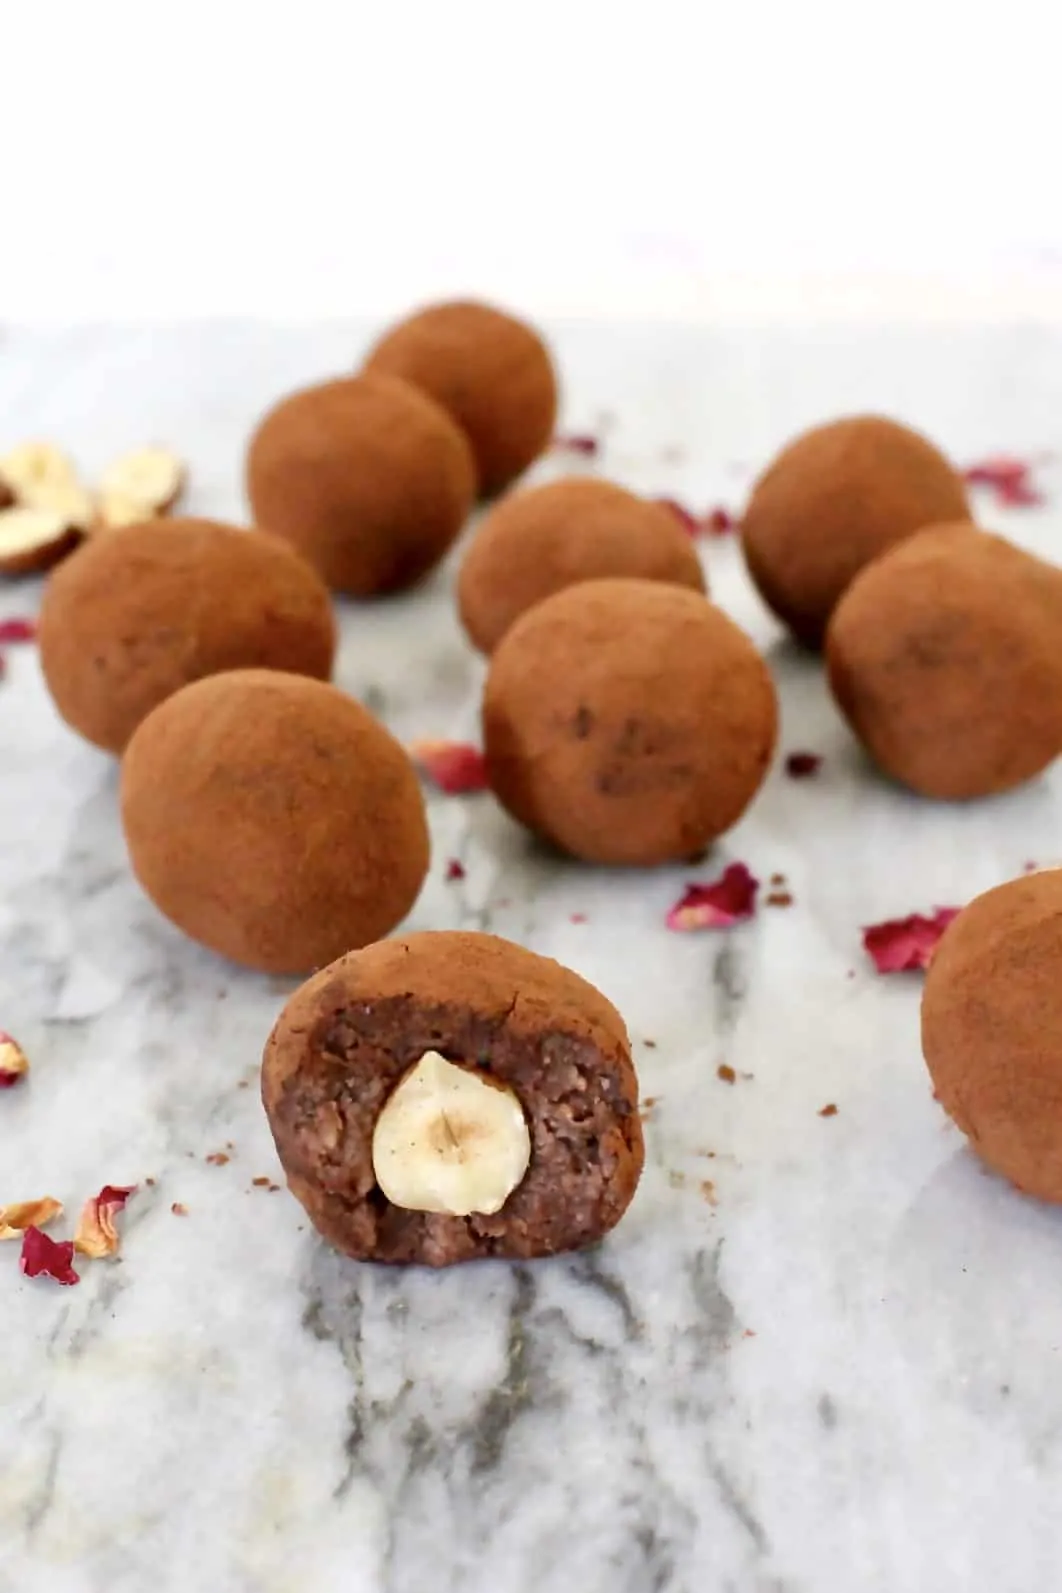 Ten chocolate hazelnut truffles with a mouthful taken out of one